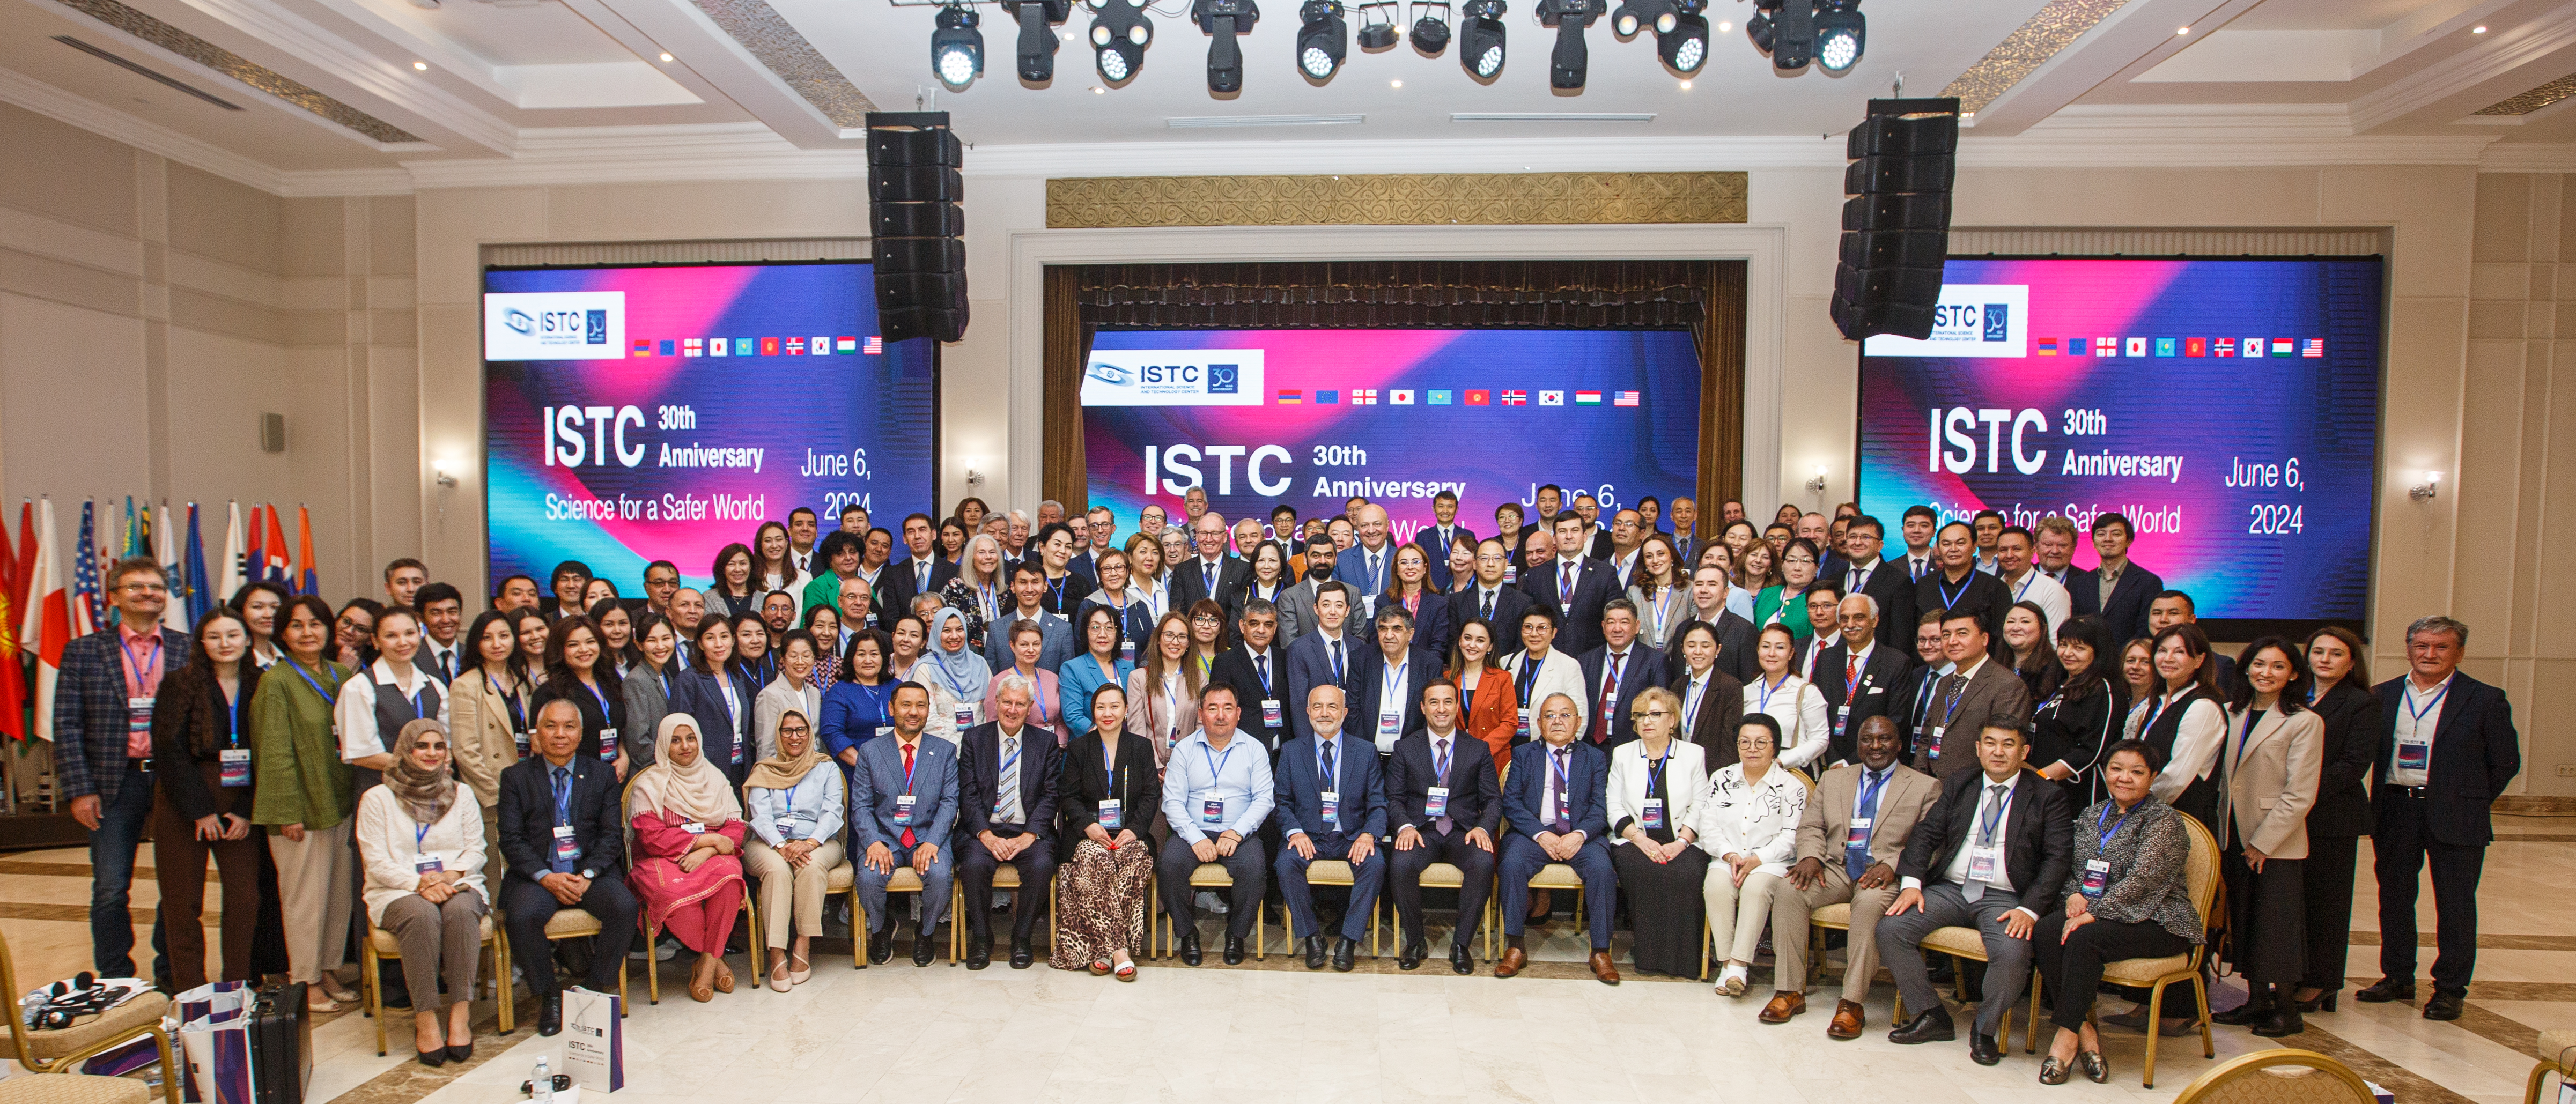 ISTC 30th Anniversary event took place in Astana, Kazakhstan